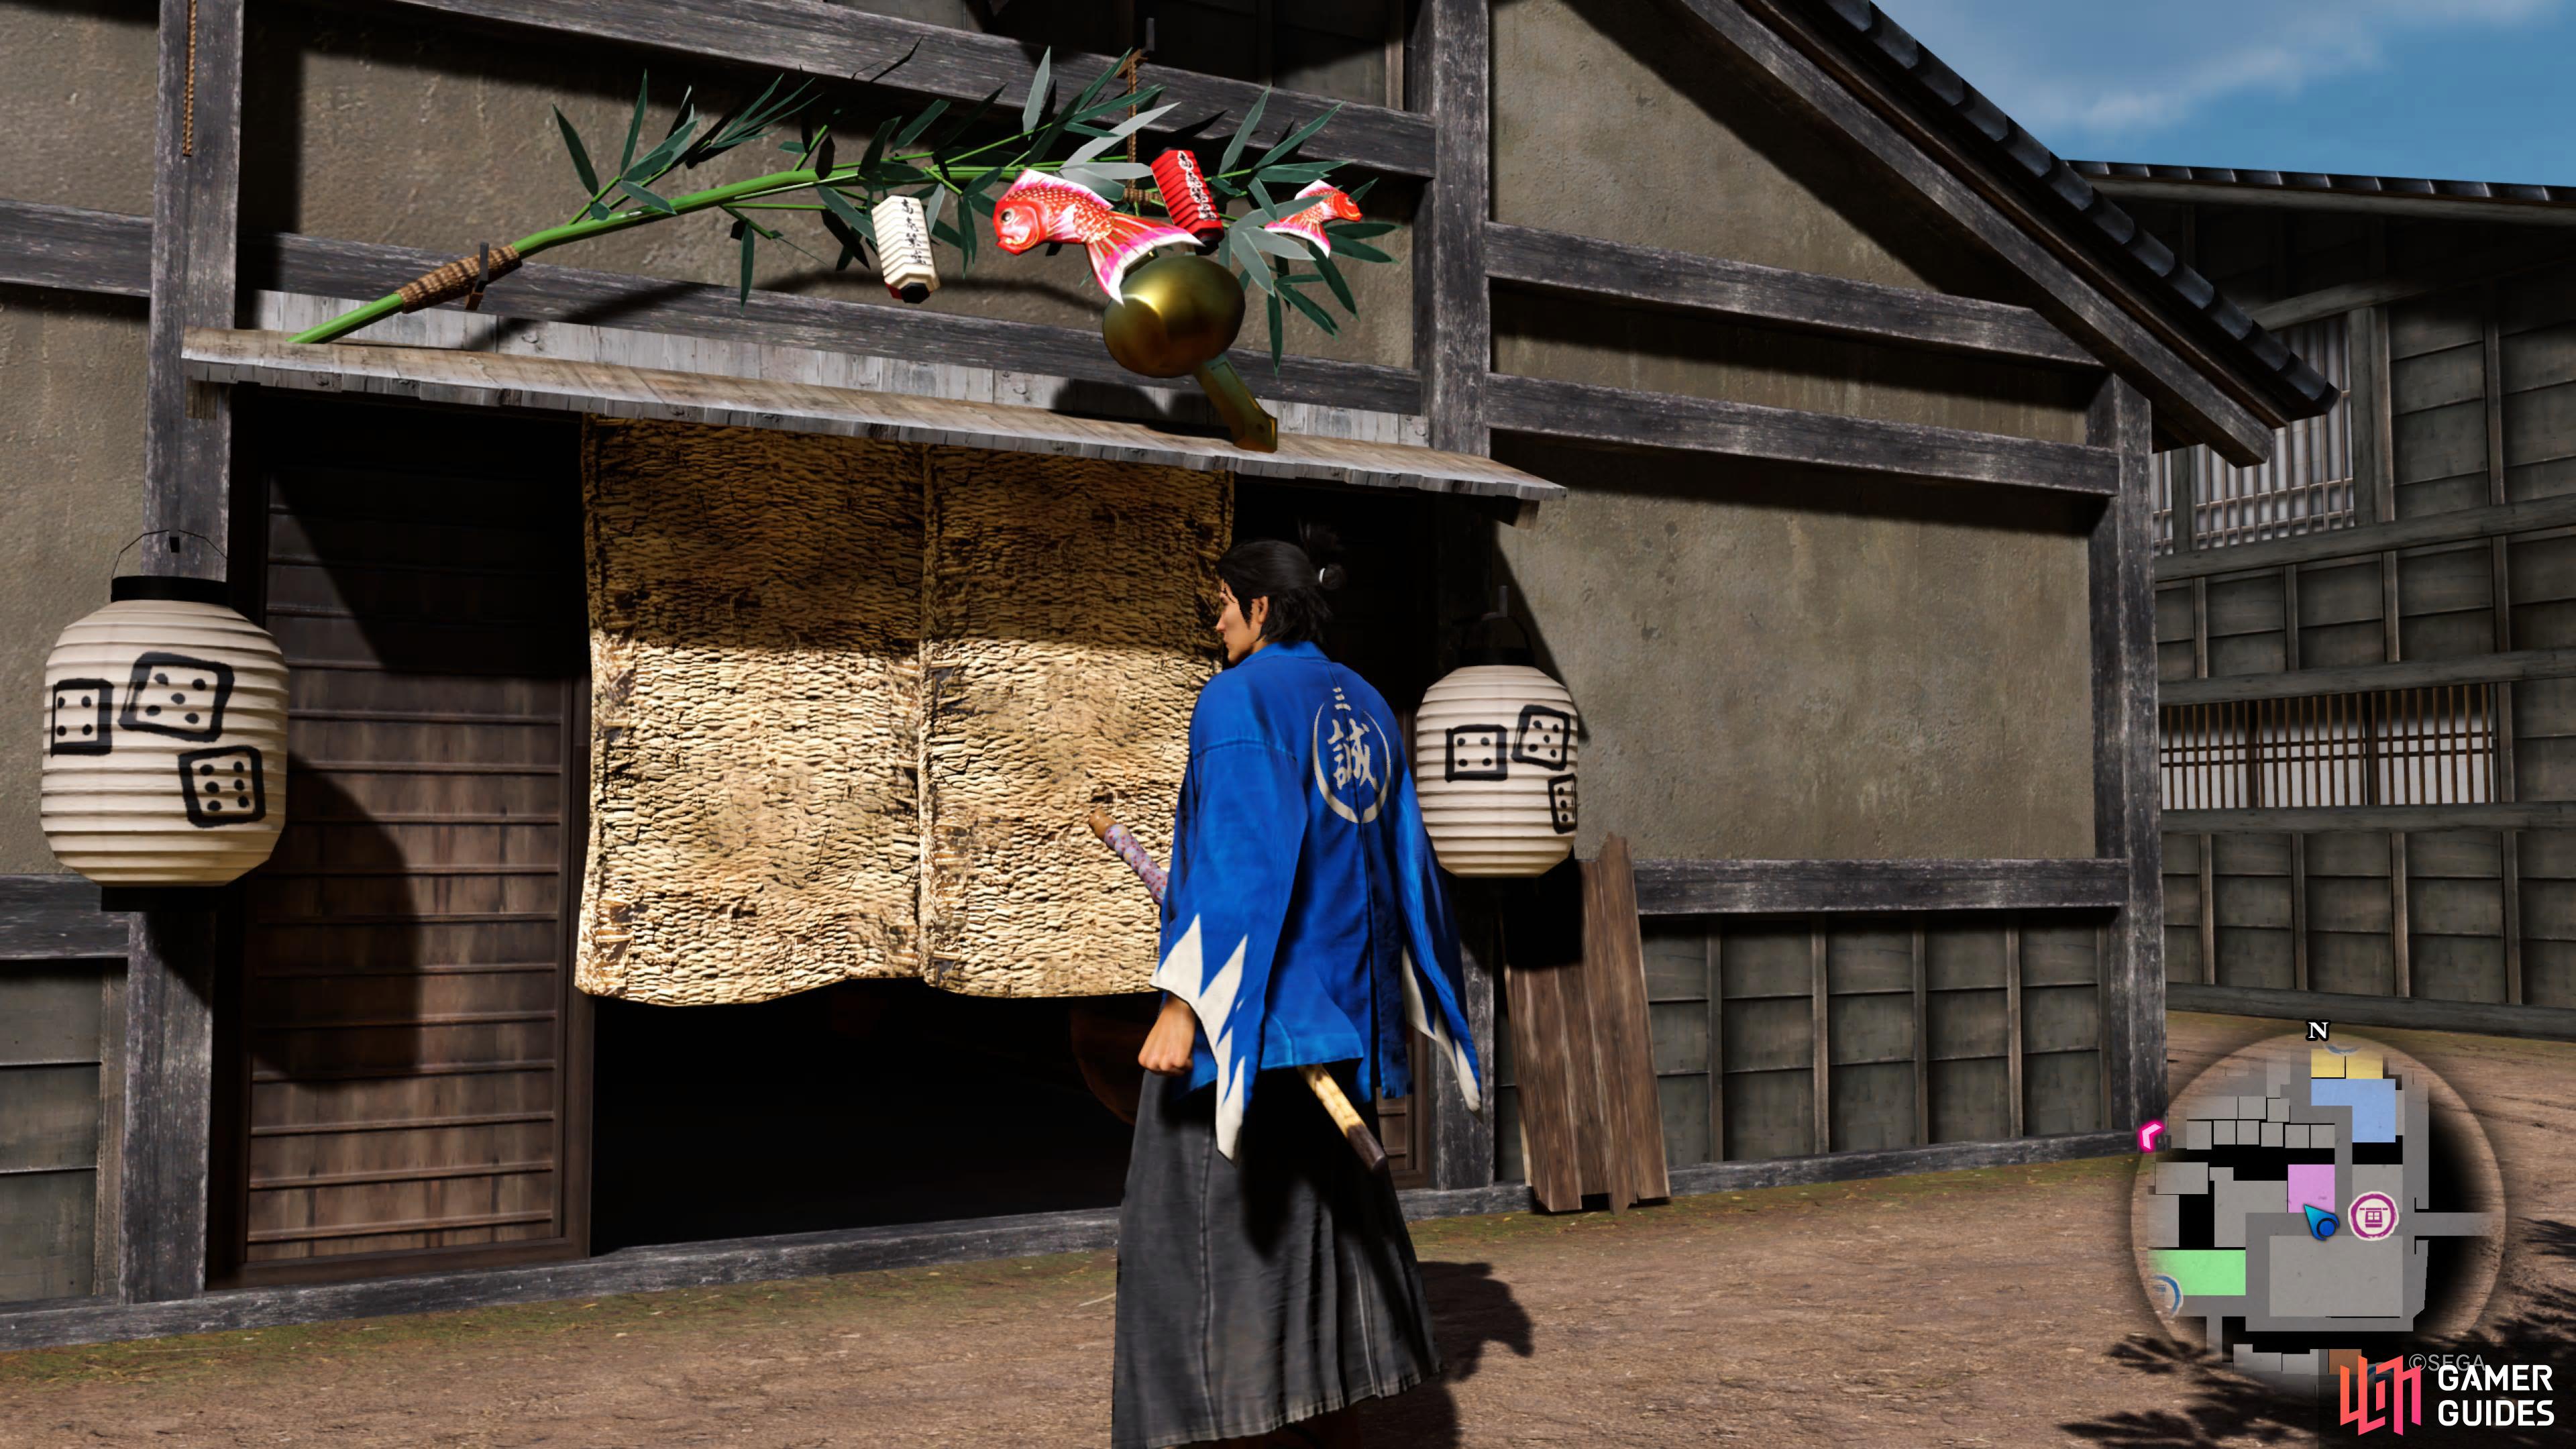 The Gambling Den allows you to exchange your winning for useful items.